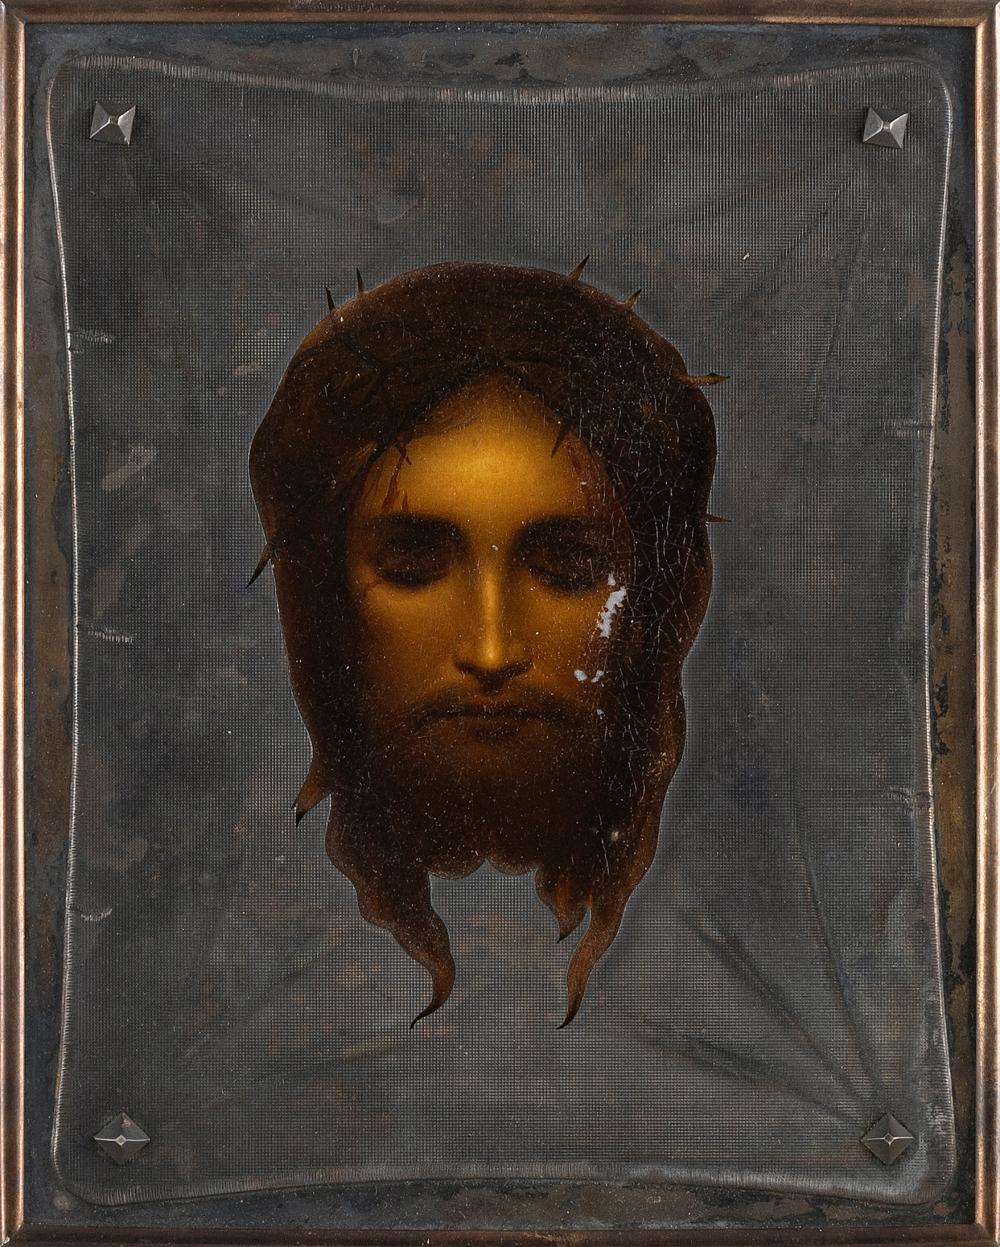 RUSSIAN ICON OF CHRIST 19TH CENTURY